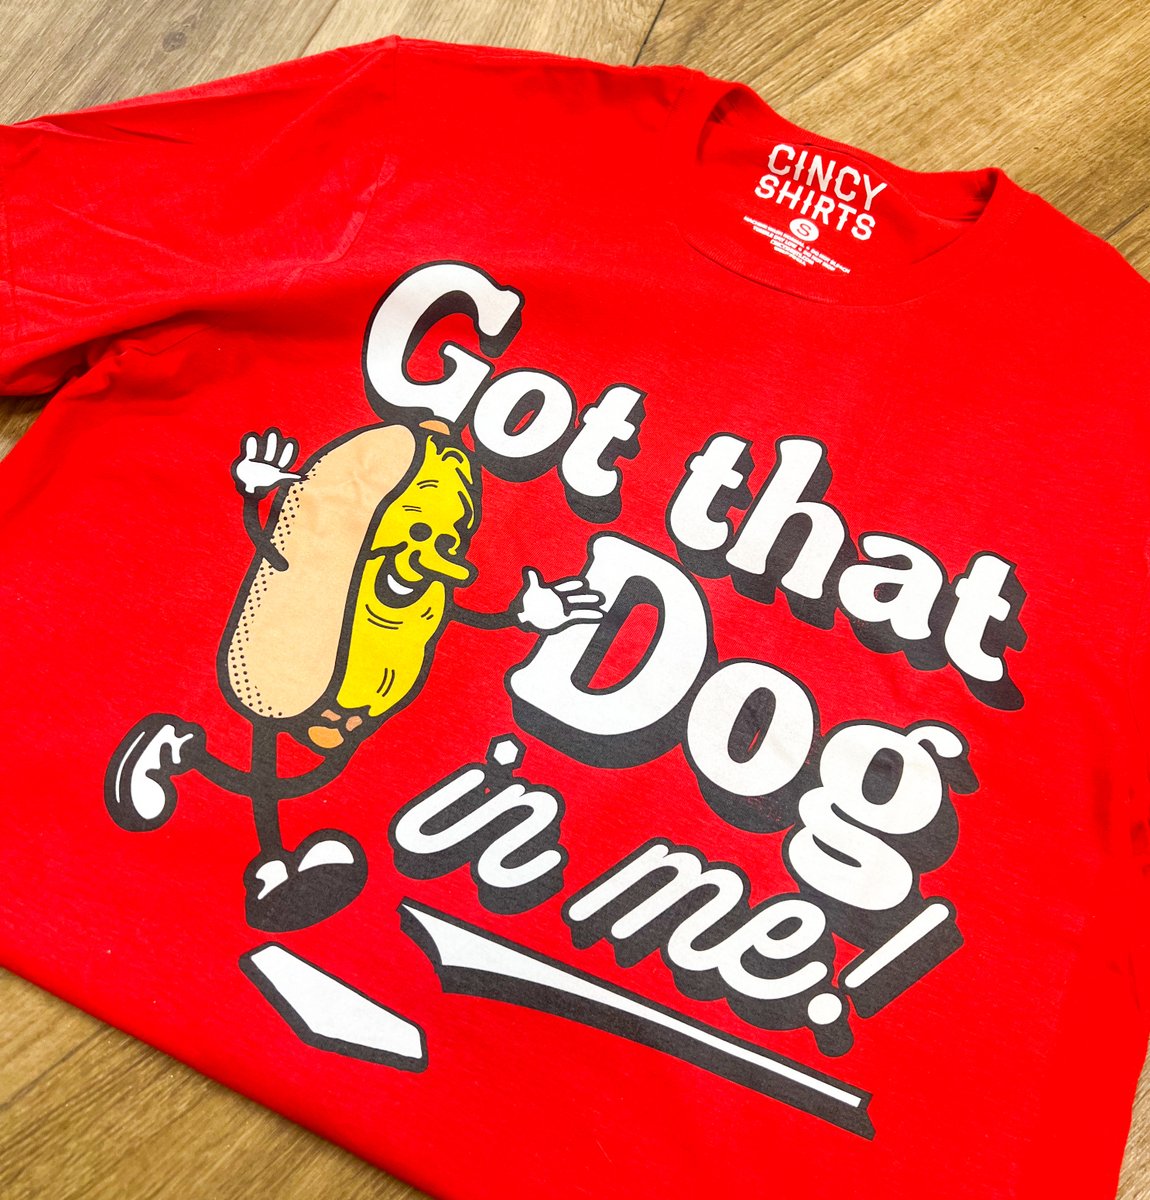 A shirt for everyone who has that coney dog in them 🌭 👉 cincyshirts.com/cincychili